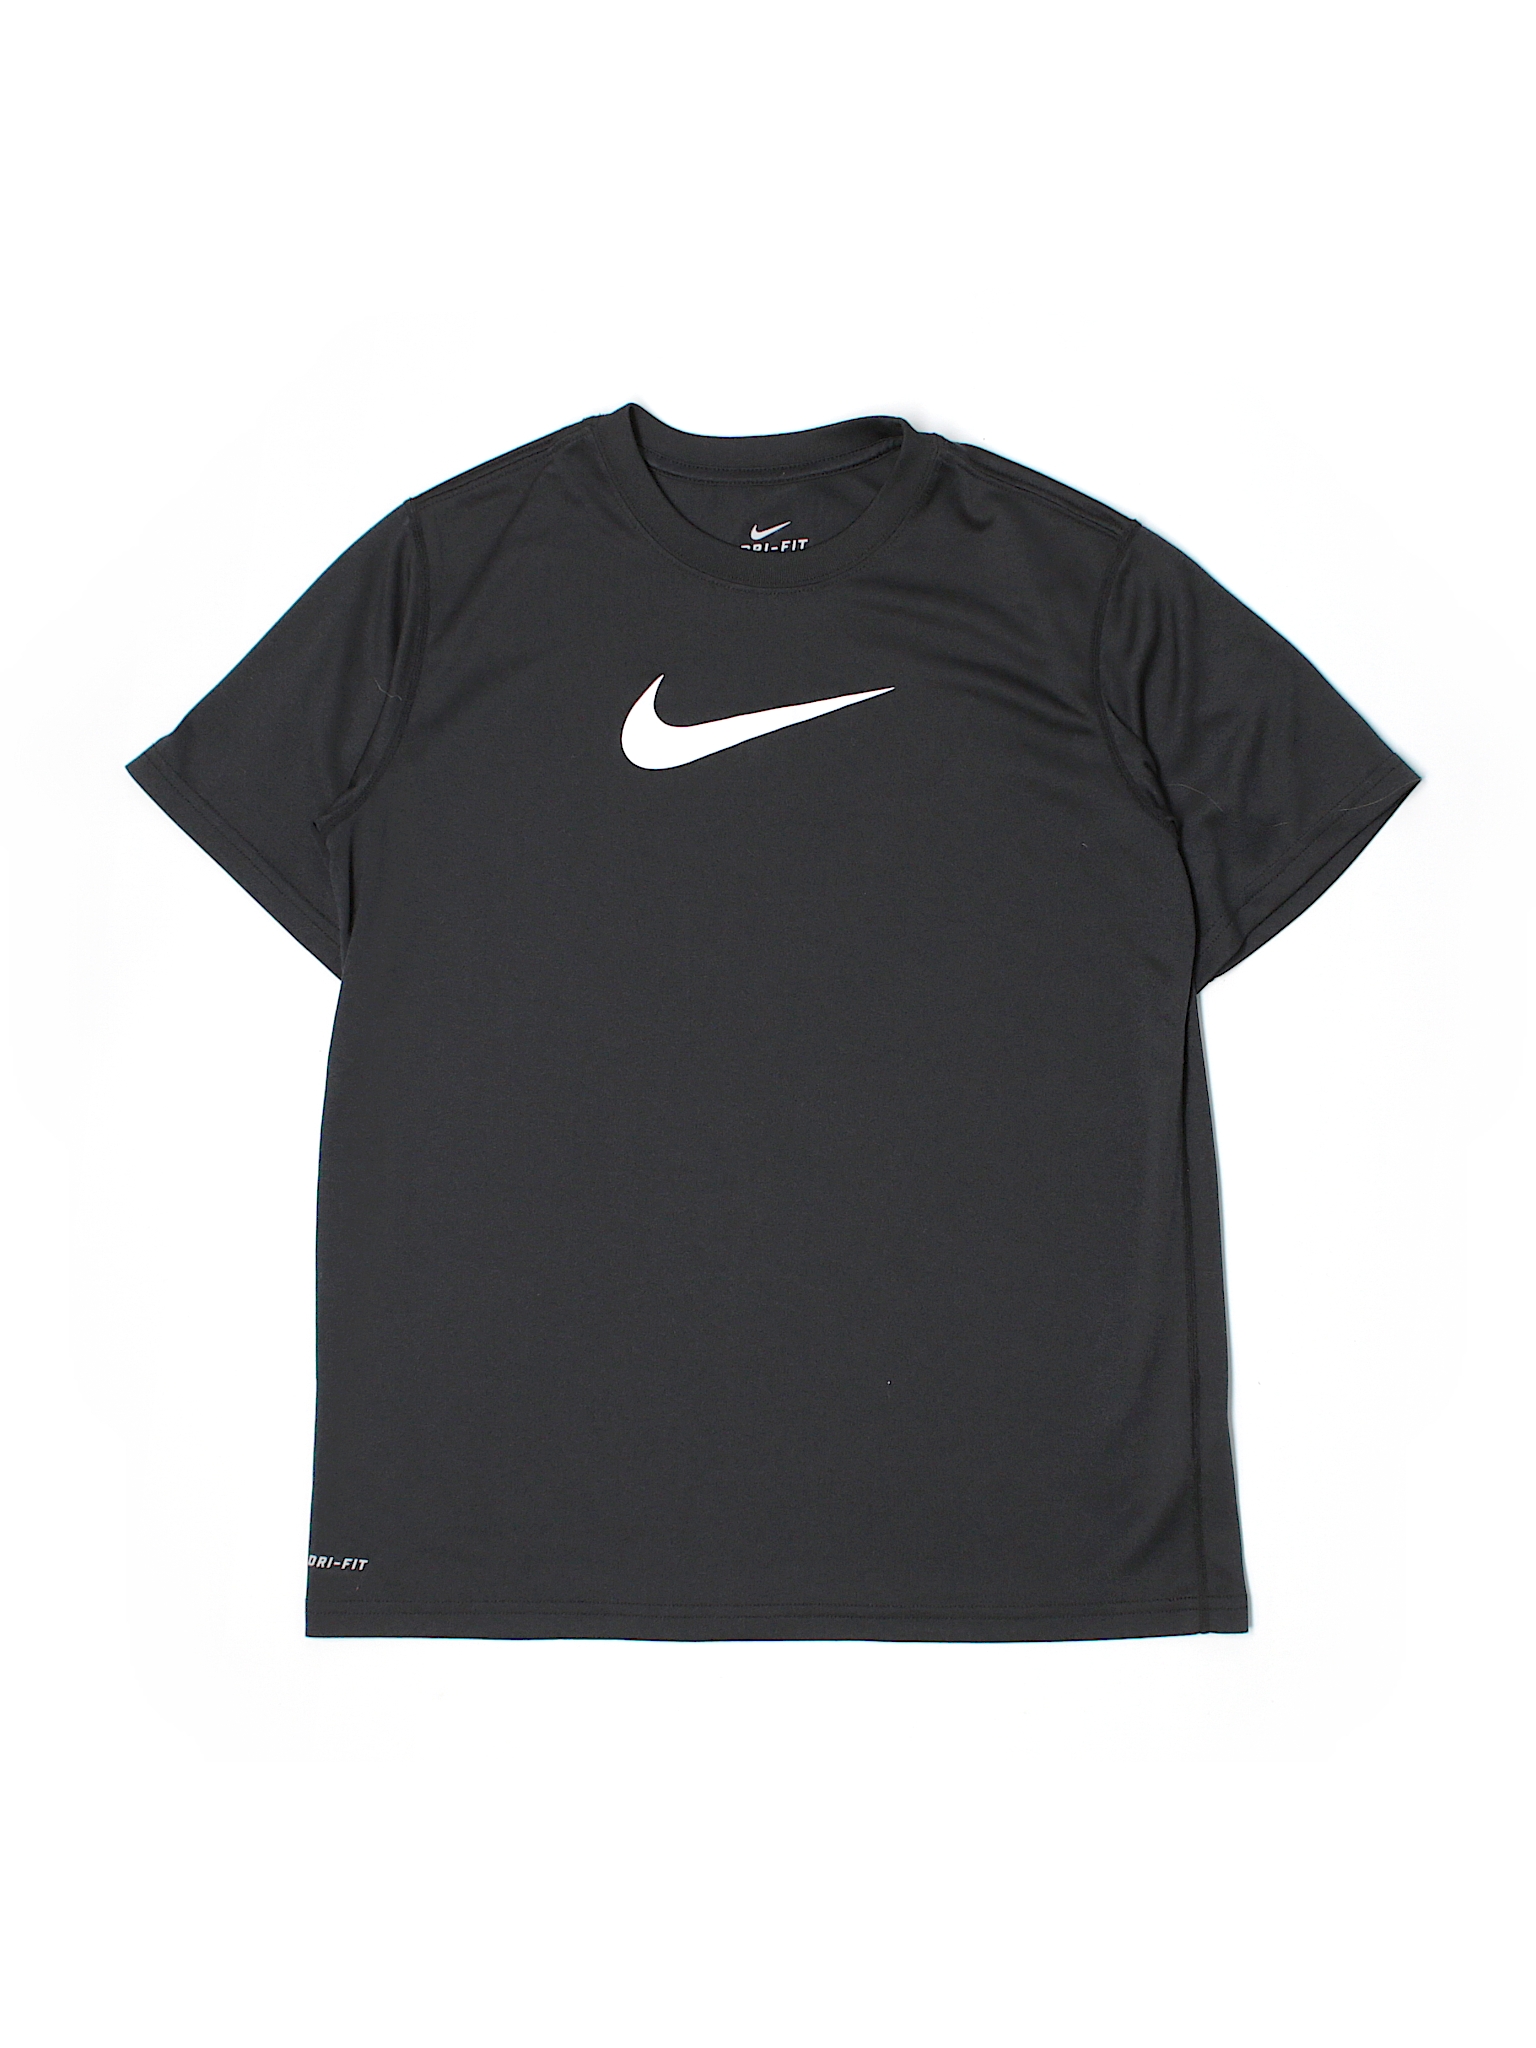 Nike 100% Polyester Graphic Black Active T-Shirt Size L (Youth) - 63% ...